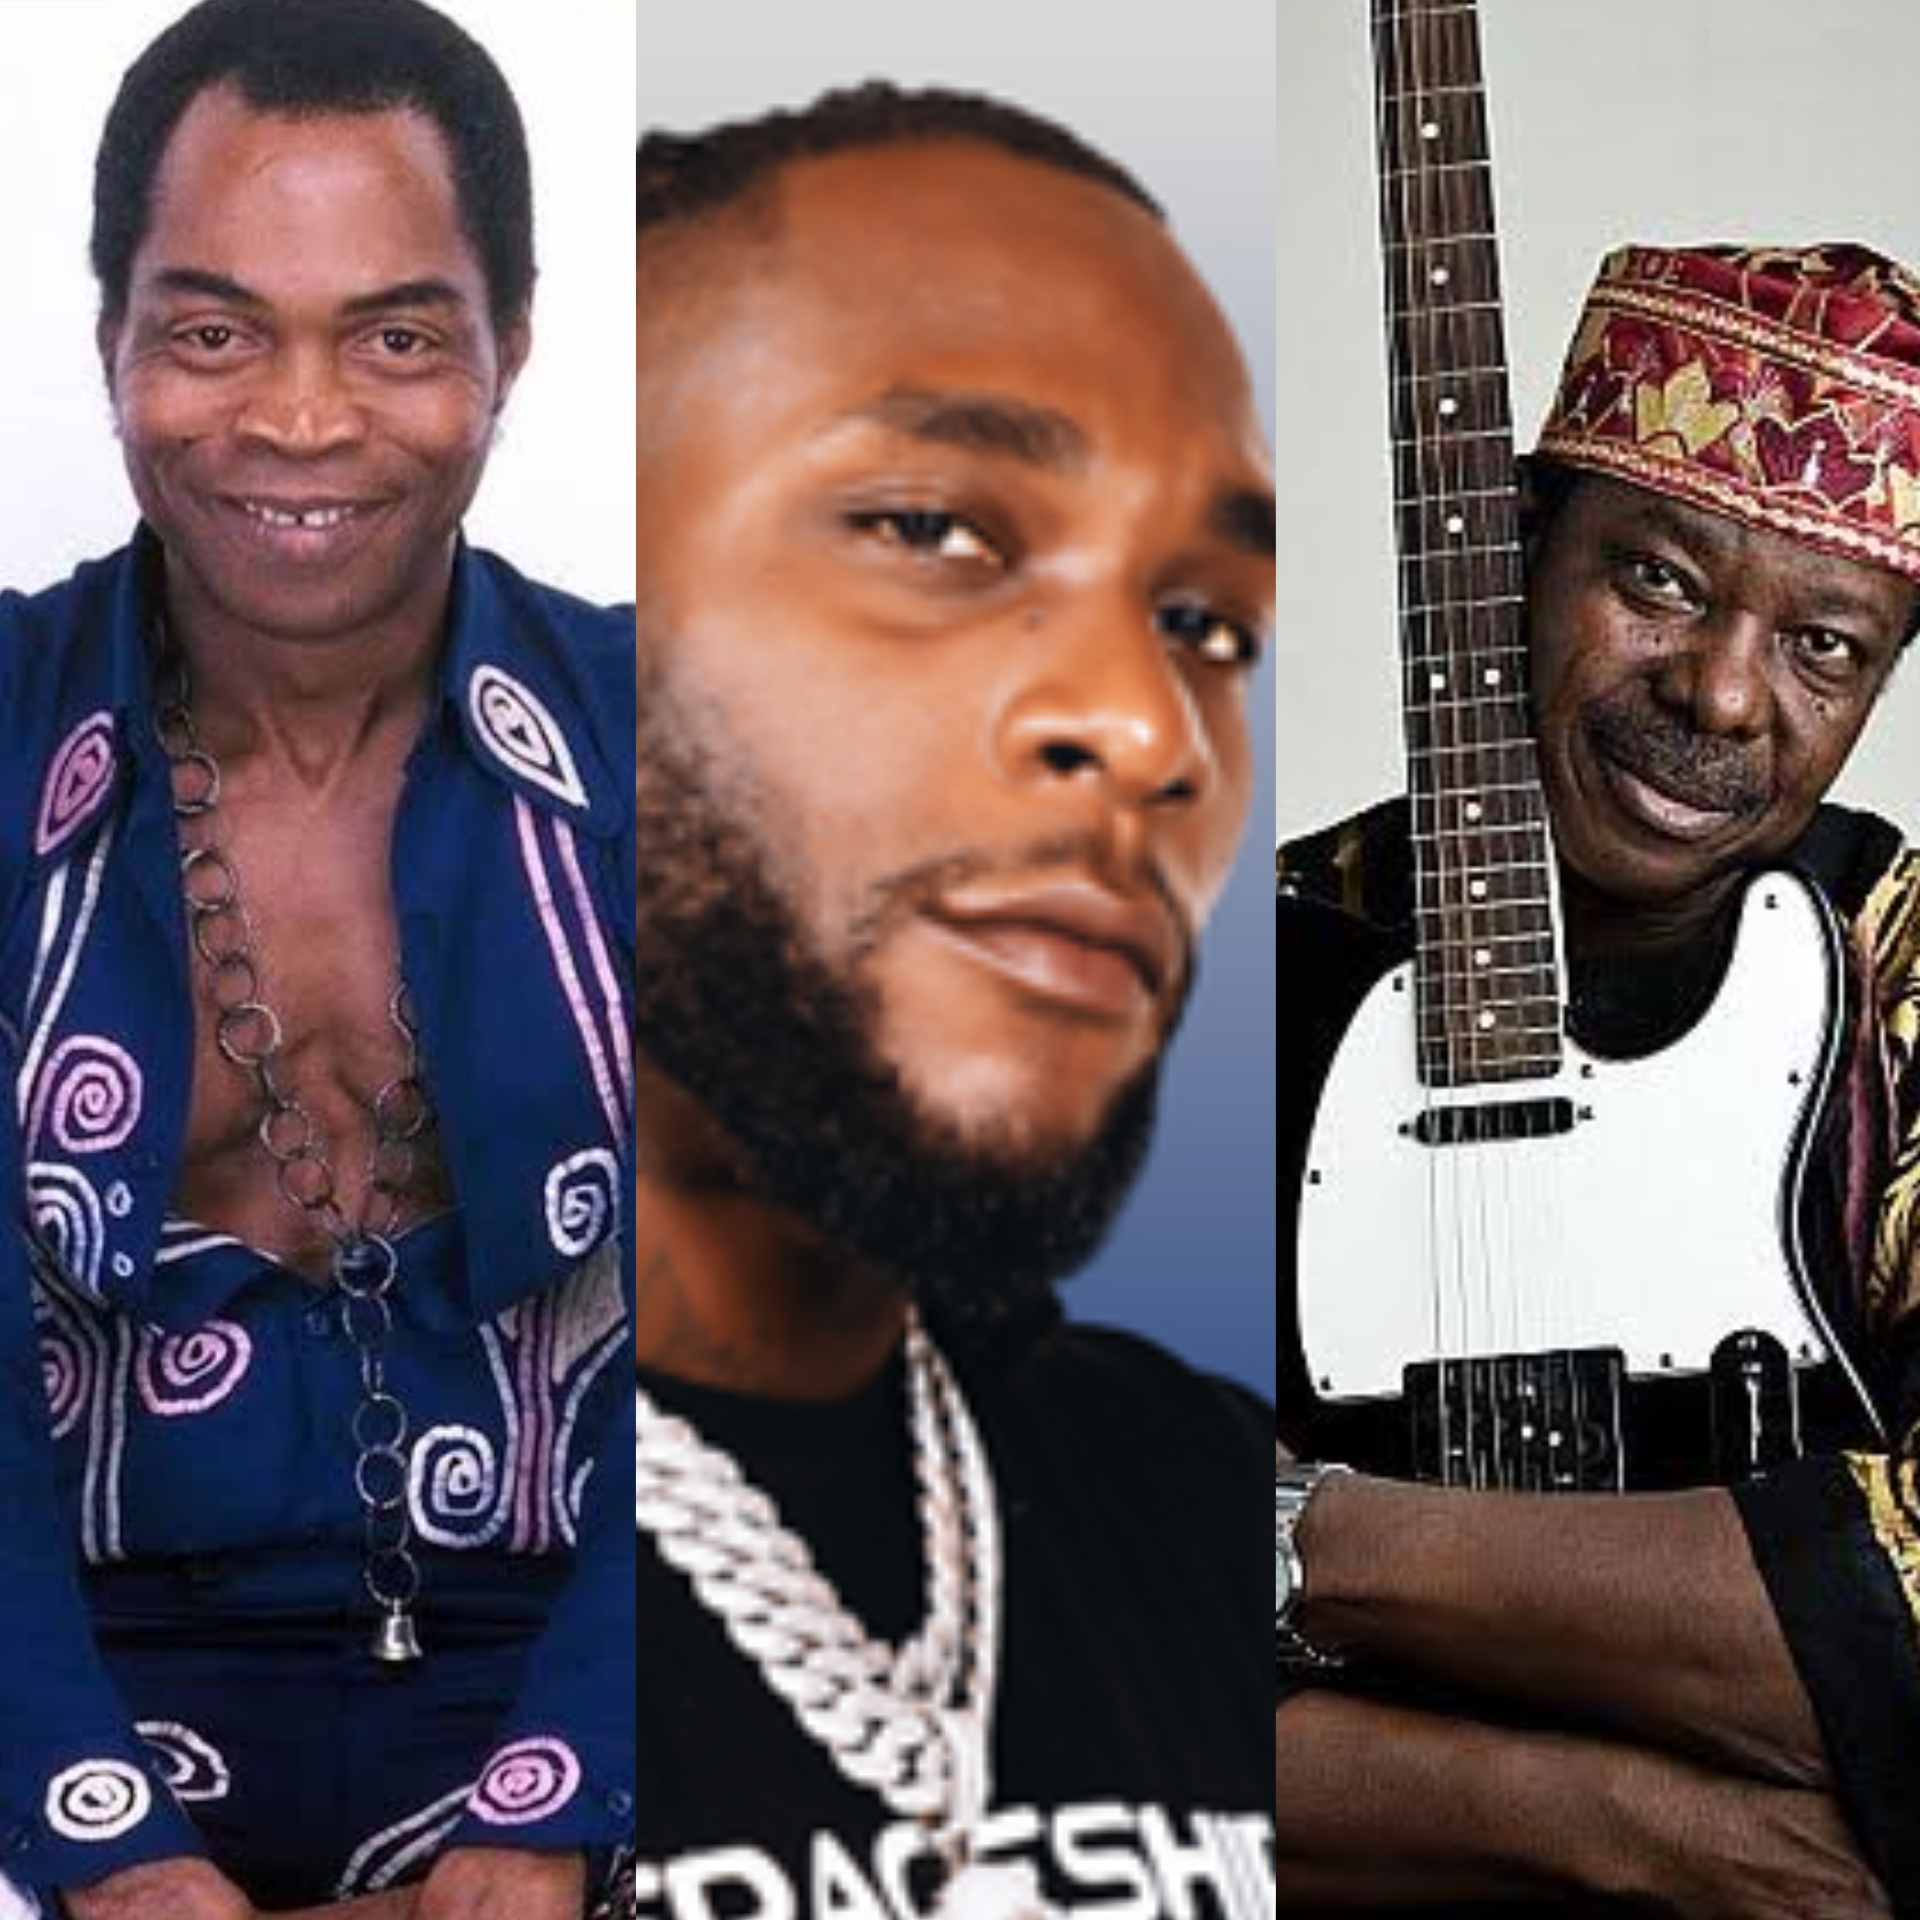 Fela Kuti, Sunny Ade, And Burna Boy Feature Among Rolling Stone'S 500 Greatest Albums, Yours Truly, News, April 28, 2024